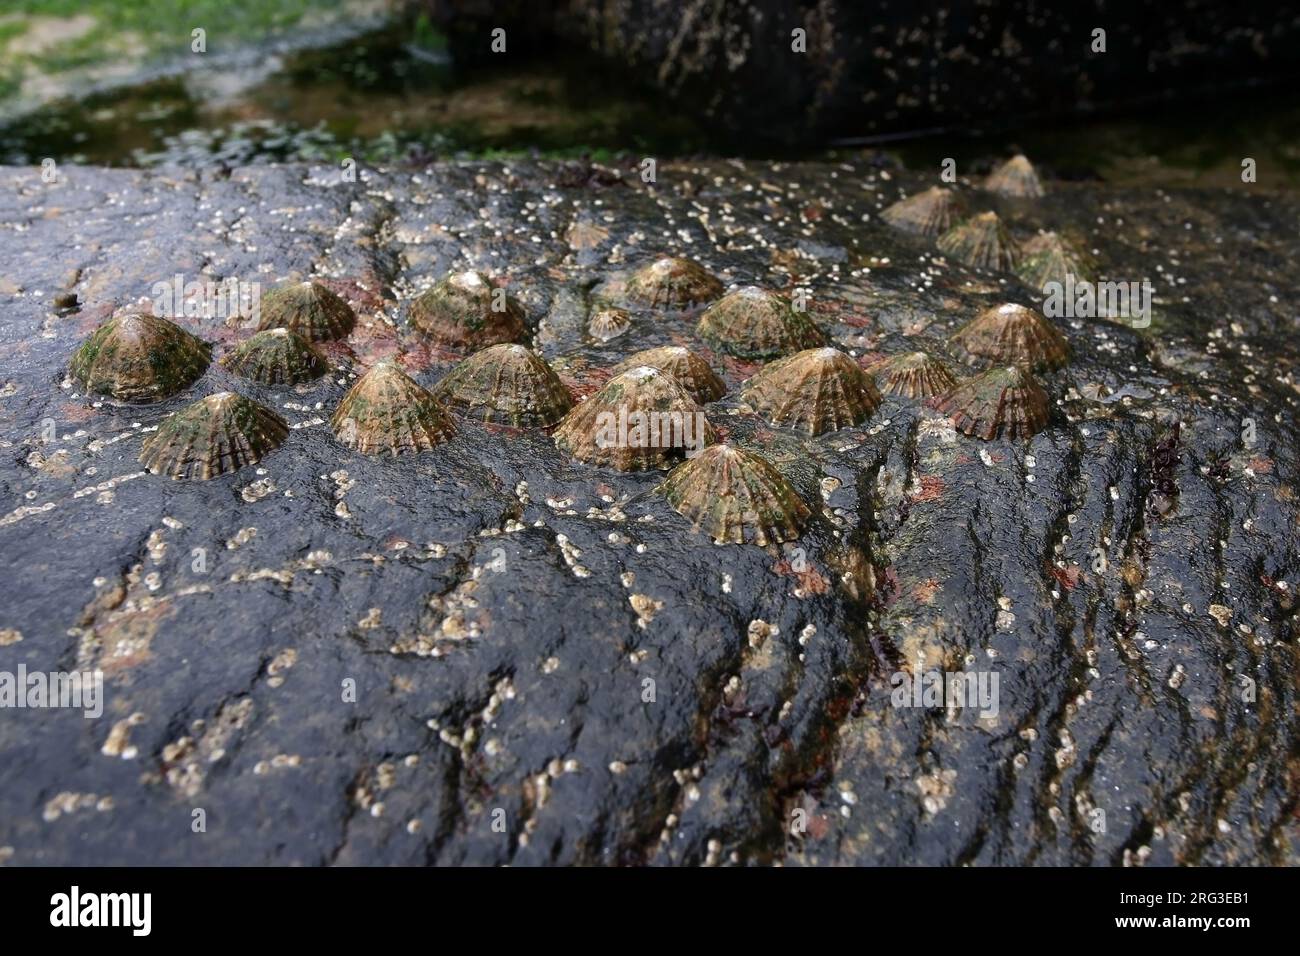 Limpits can be found on rocky coasts. Stock Photo